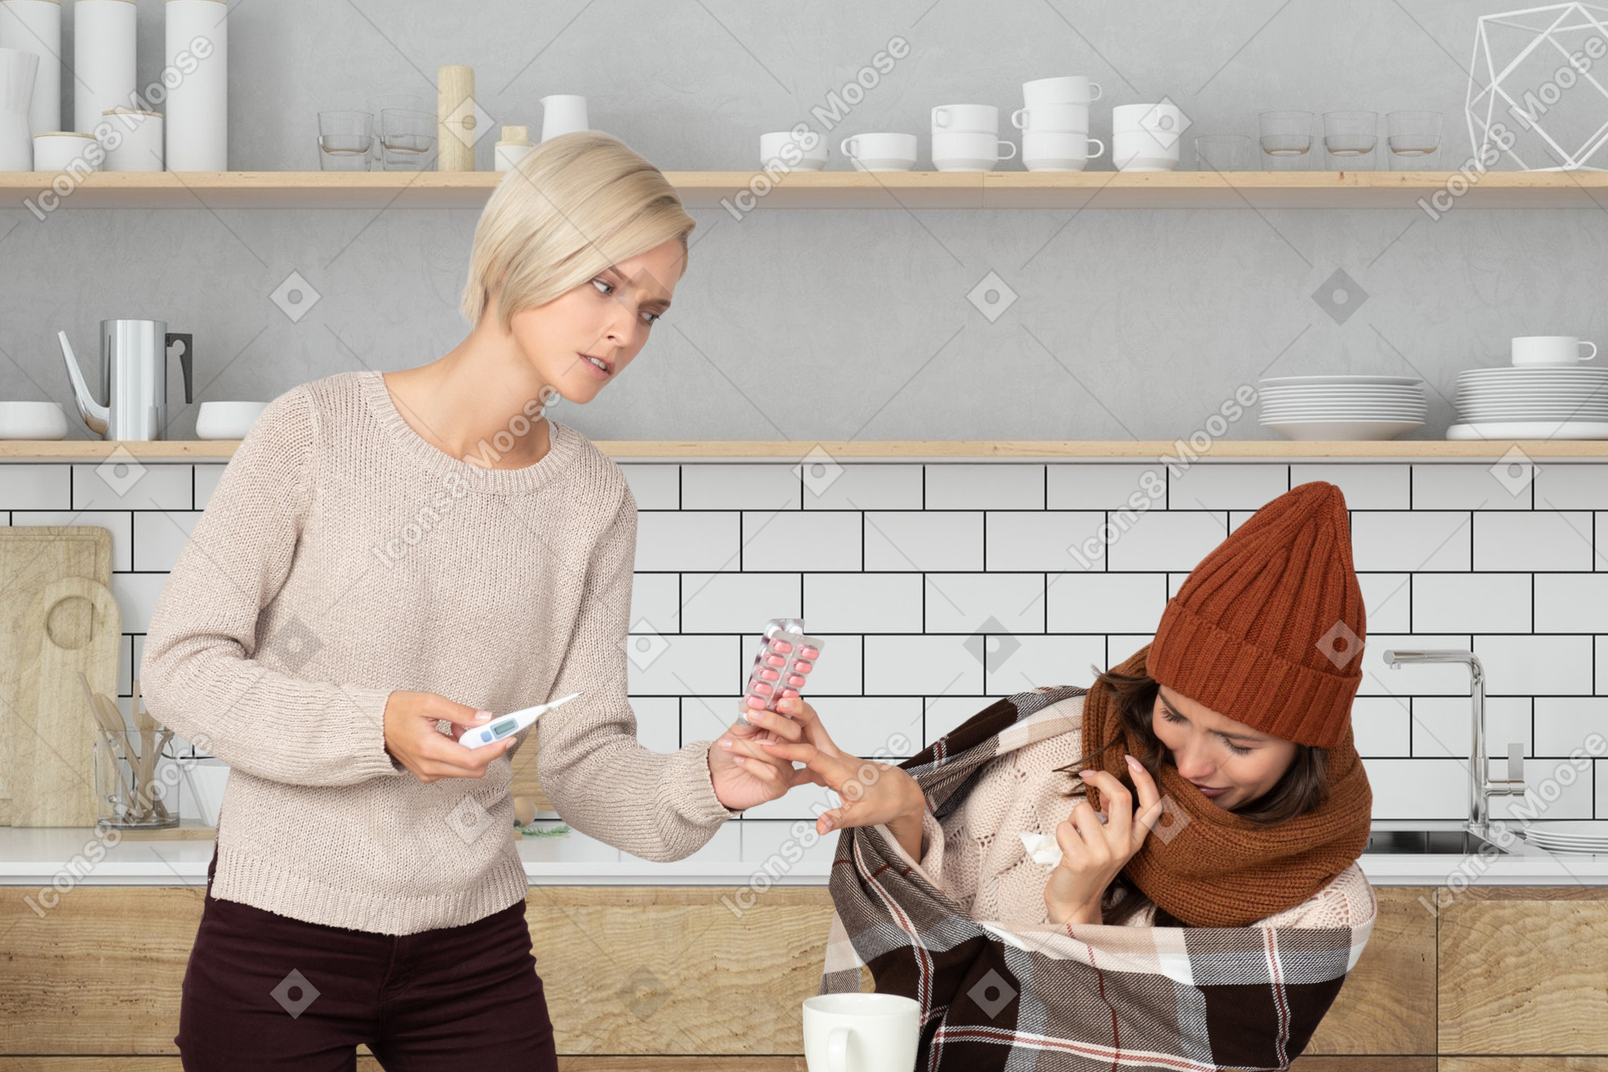 Woman doesn't want to treat a cold